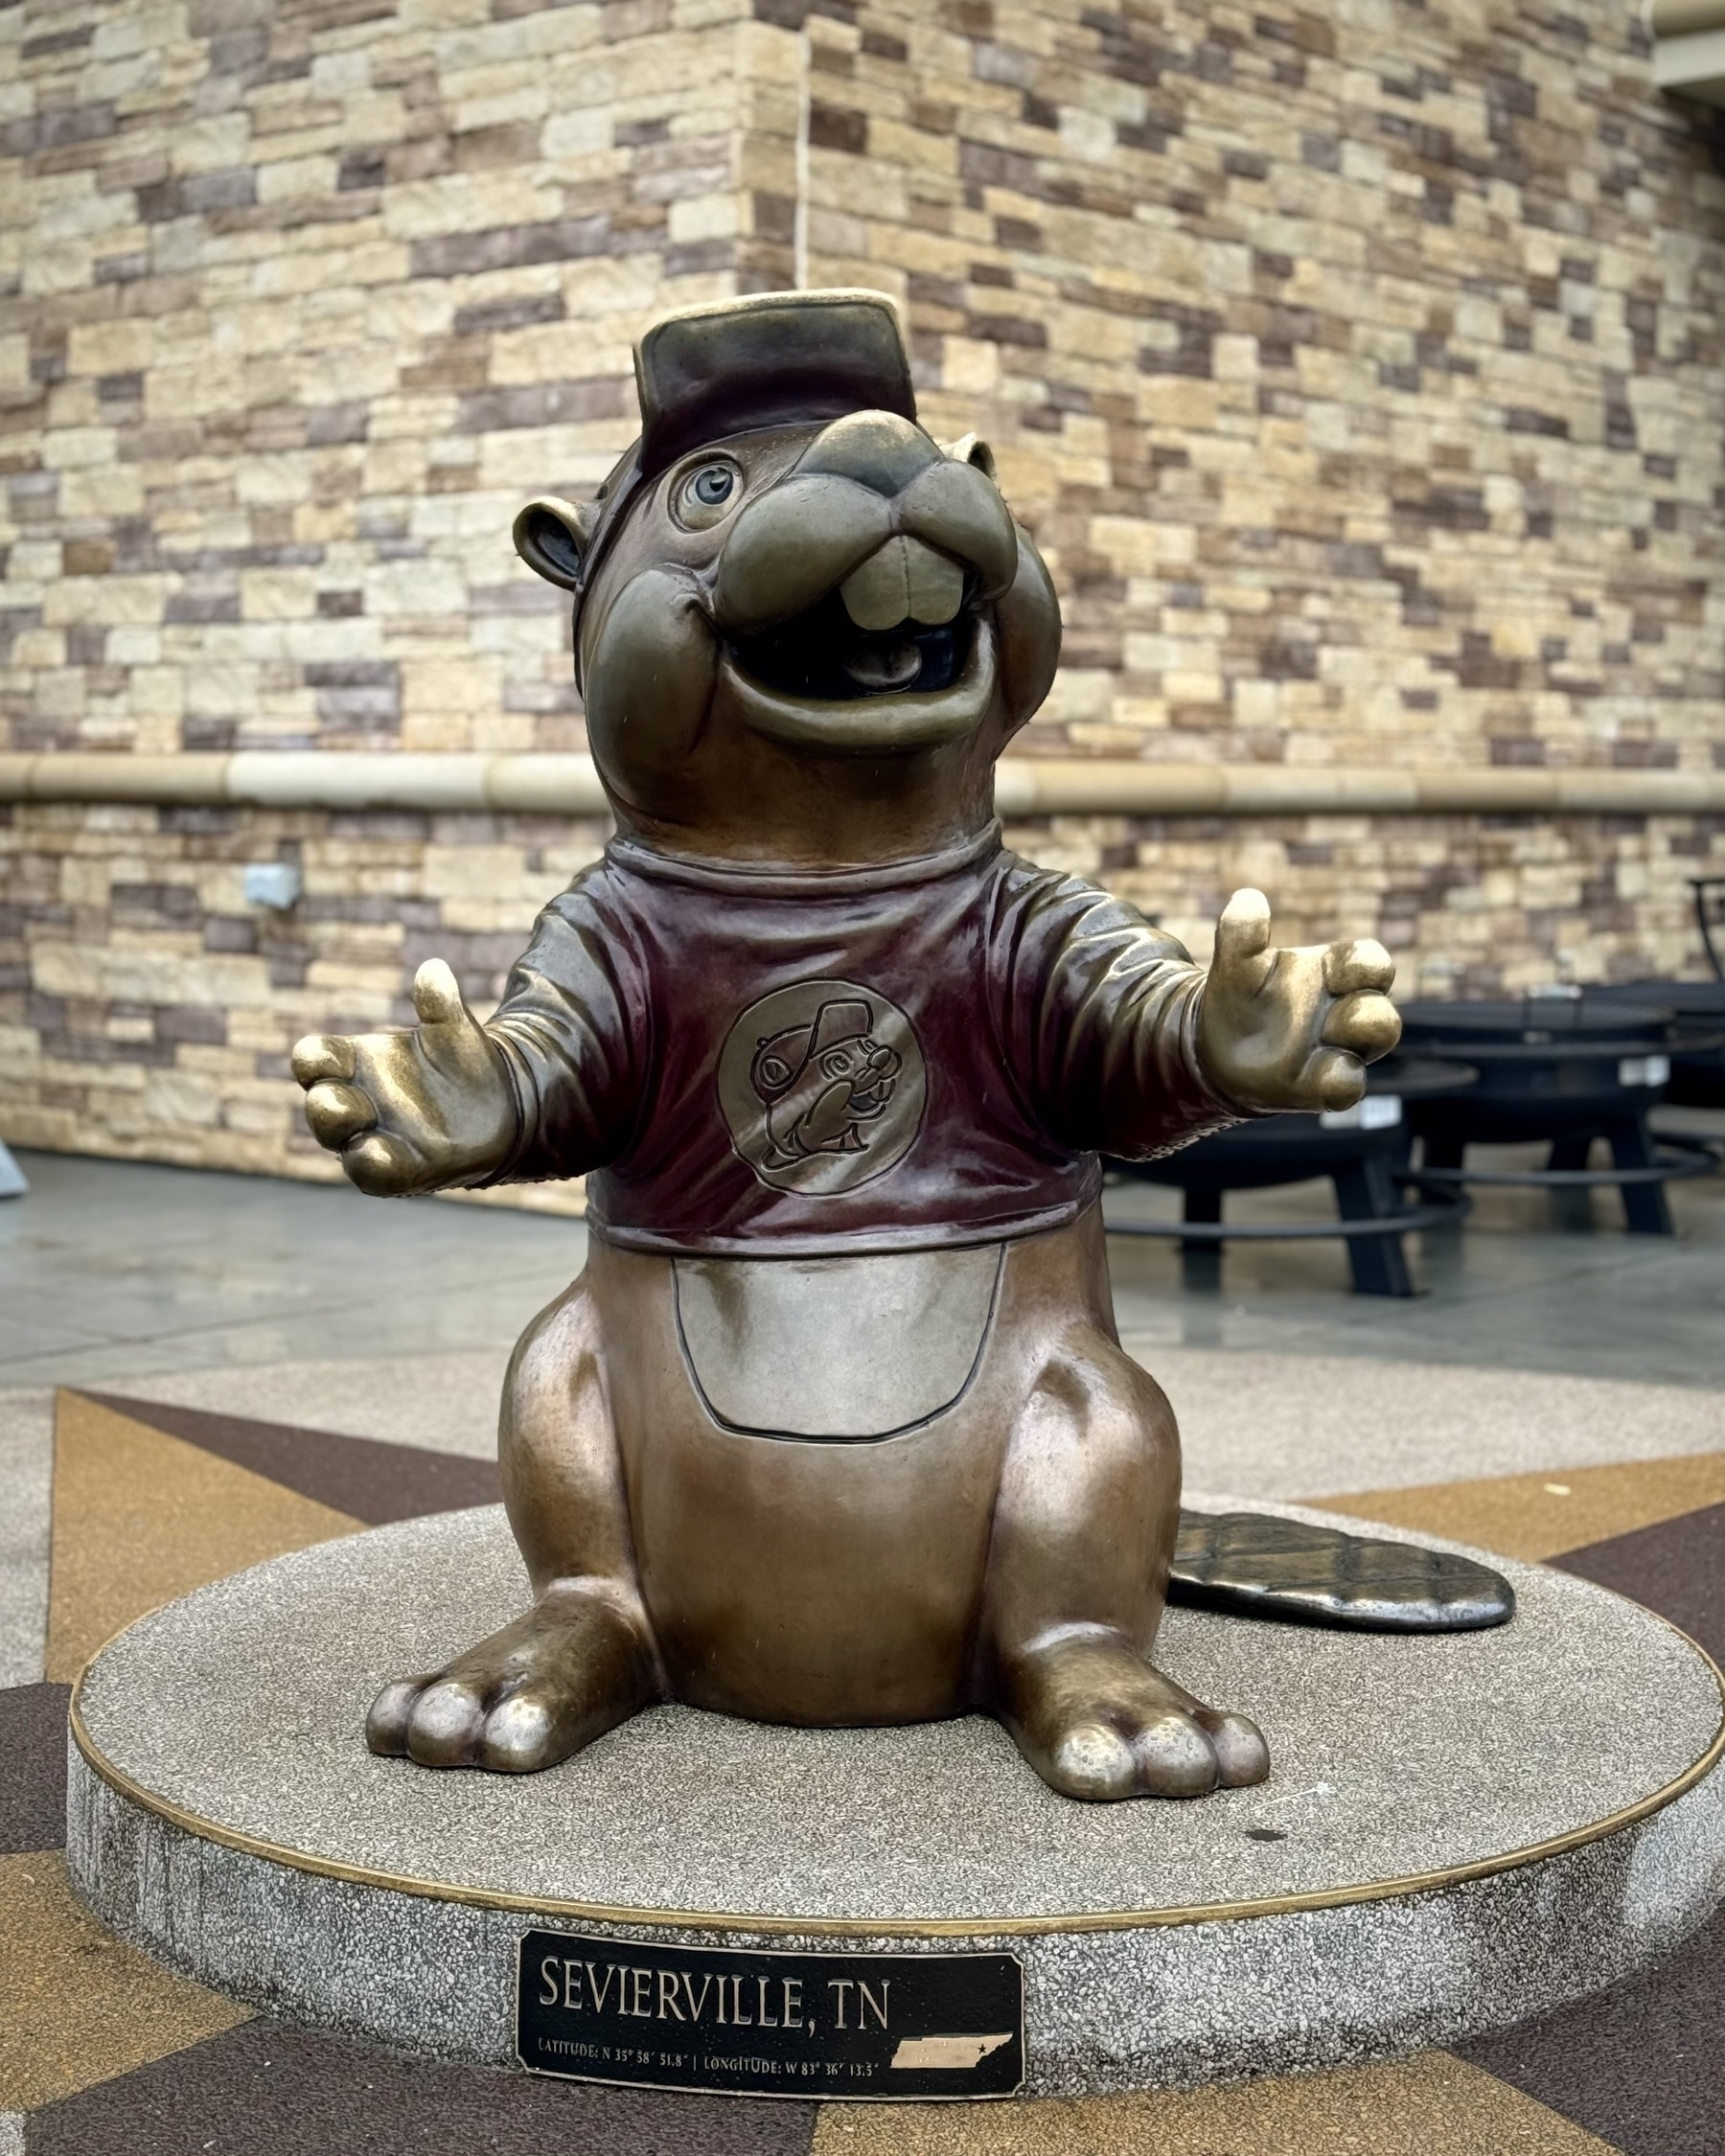 a bronze statue of a stupid beaver mascot with a black reading Sevierville, TN